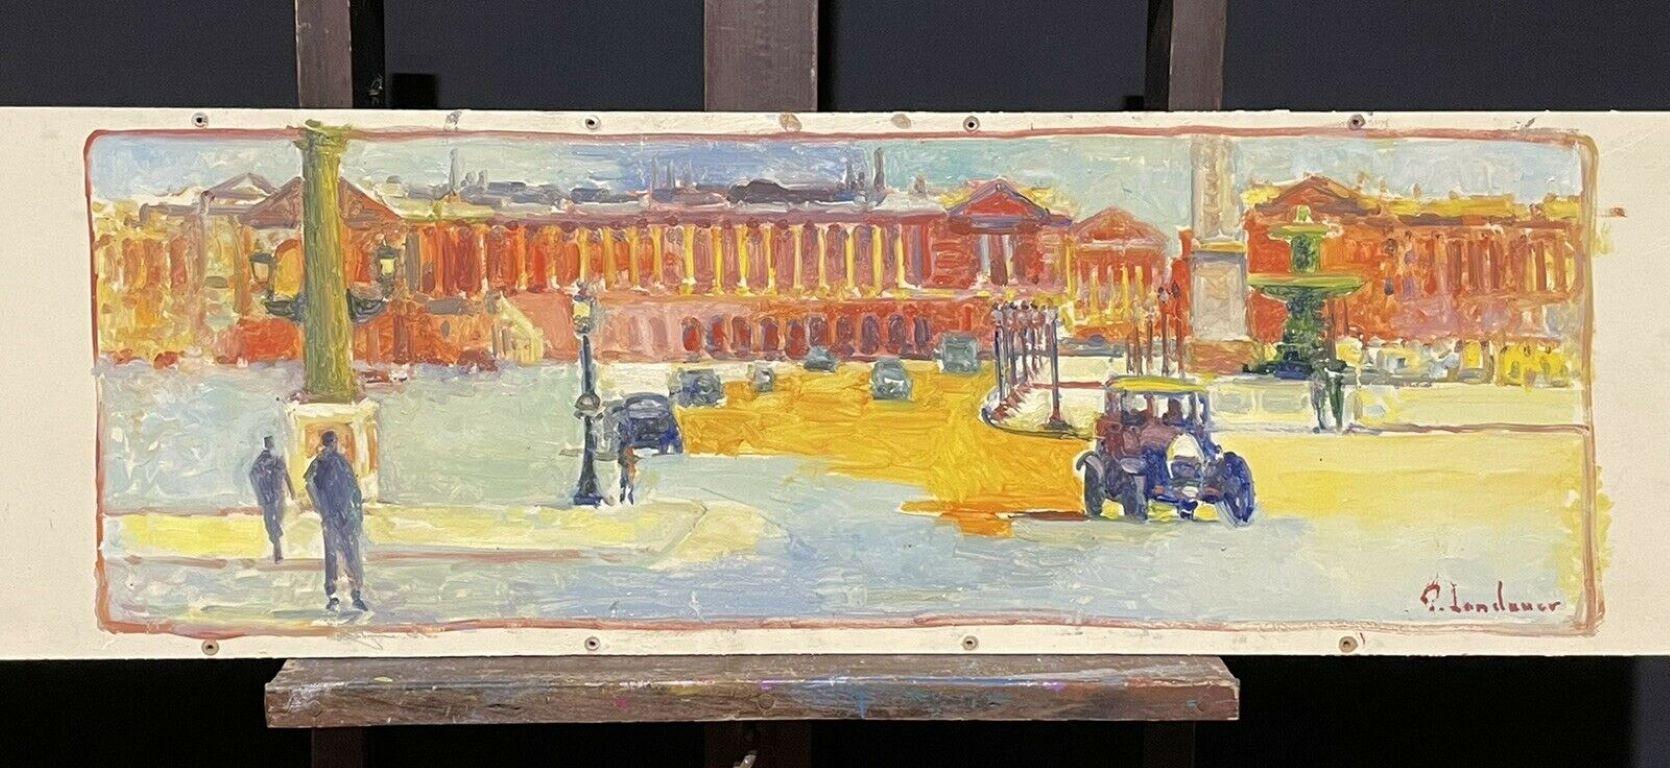 Large Signed French Impressionist Oil - Vintage Parisian City Street scene - Painting by Patrice Landauer